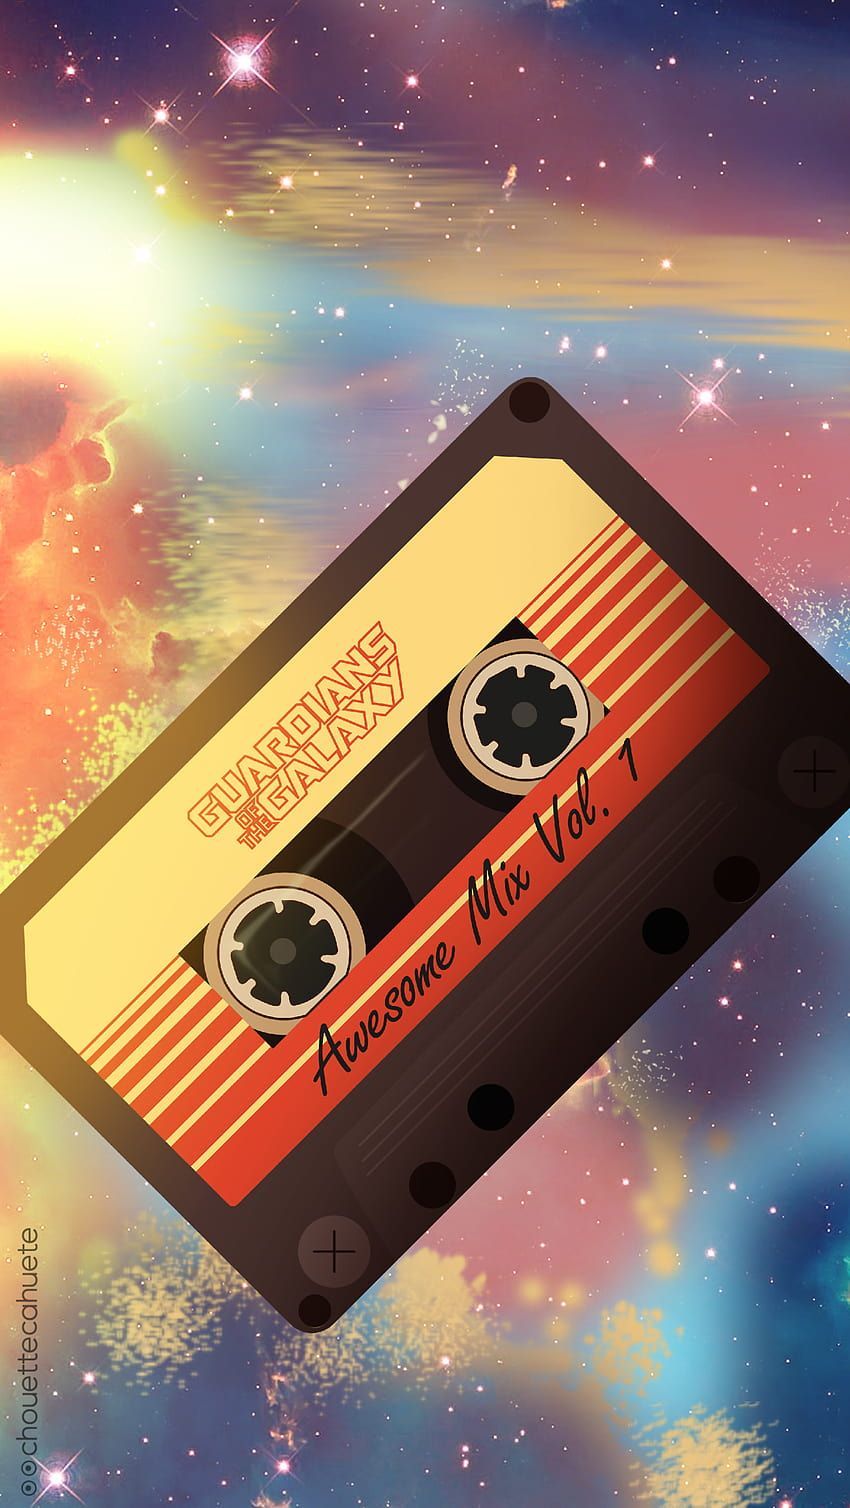 Guardians of the Galaxy Cassette Tape iPhone 6 wallpaper - Guardians of the Galaxy